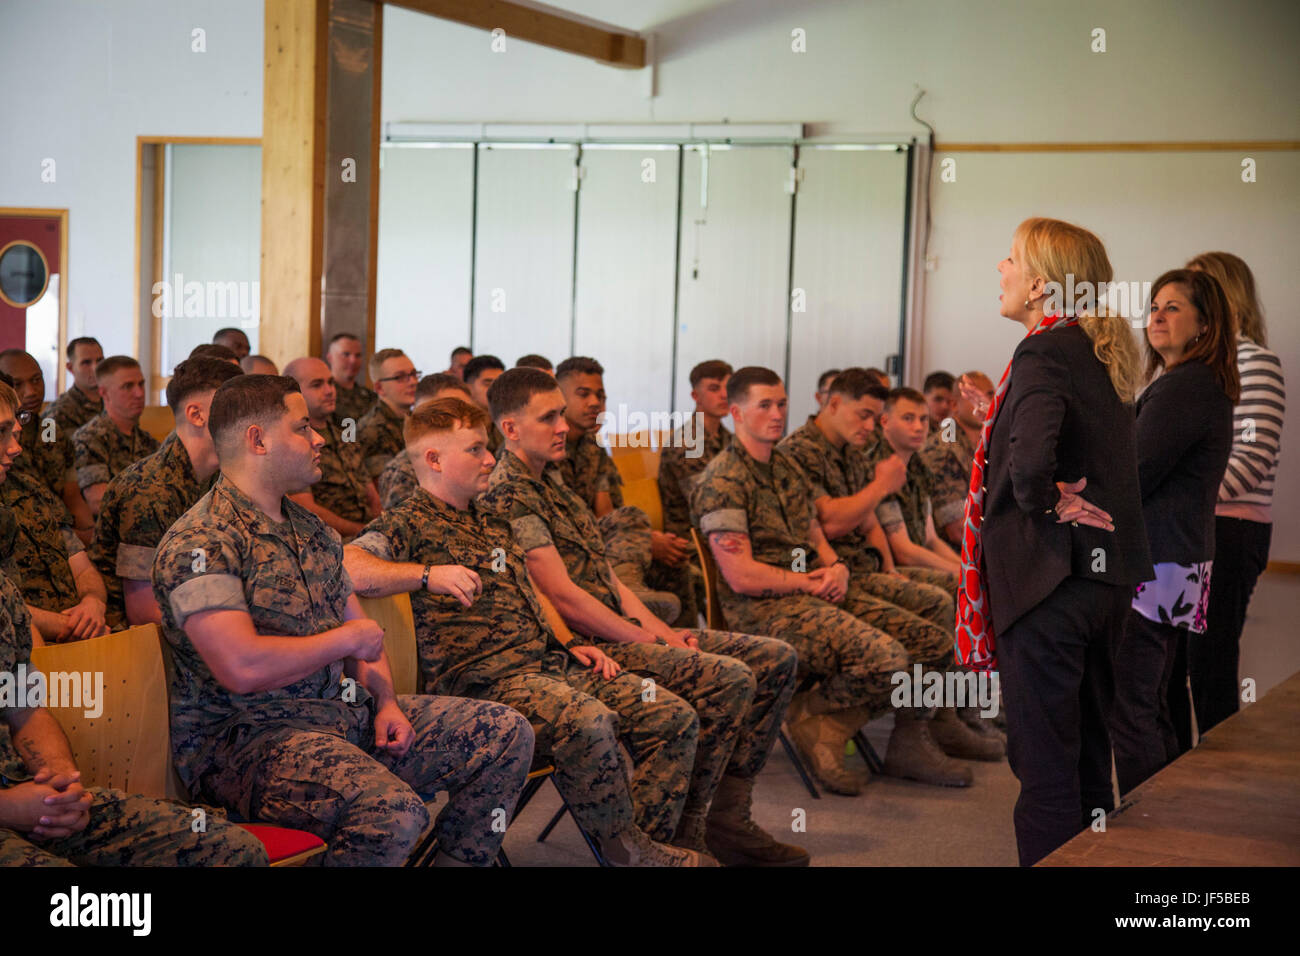 Gail Walters, wife of Gen. Glenn Walters, the Assistant Commandant of the Marine Corps, along with the wives of Sgt. Maj. Robert VanOostrom, the sergeant major of Manpower and Reserve Affairs and Lt. Gen. Michael Dana, deputy commandant of Installations and Logistics, addresses the married Marines and sailors of Marine Rotational Force Europe 17.1 in Værnes Garnison, Norway, May 29, 2017. The ladies talked with Marines about strategies for keeping in touch with spouses and children back home during deployment. (U.S. Marine Corps photo by Cpl. Emily Dorumsgaard) Stock Photo